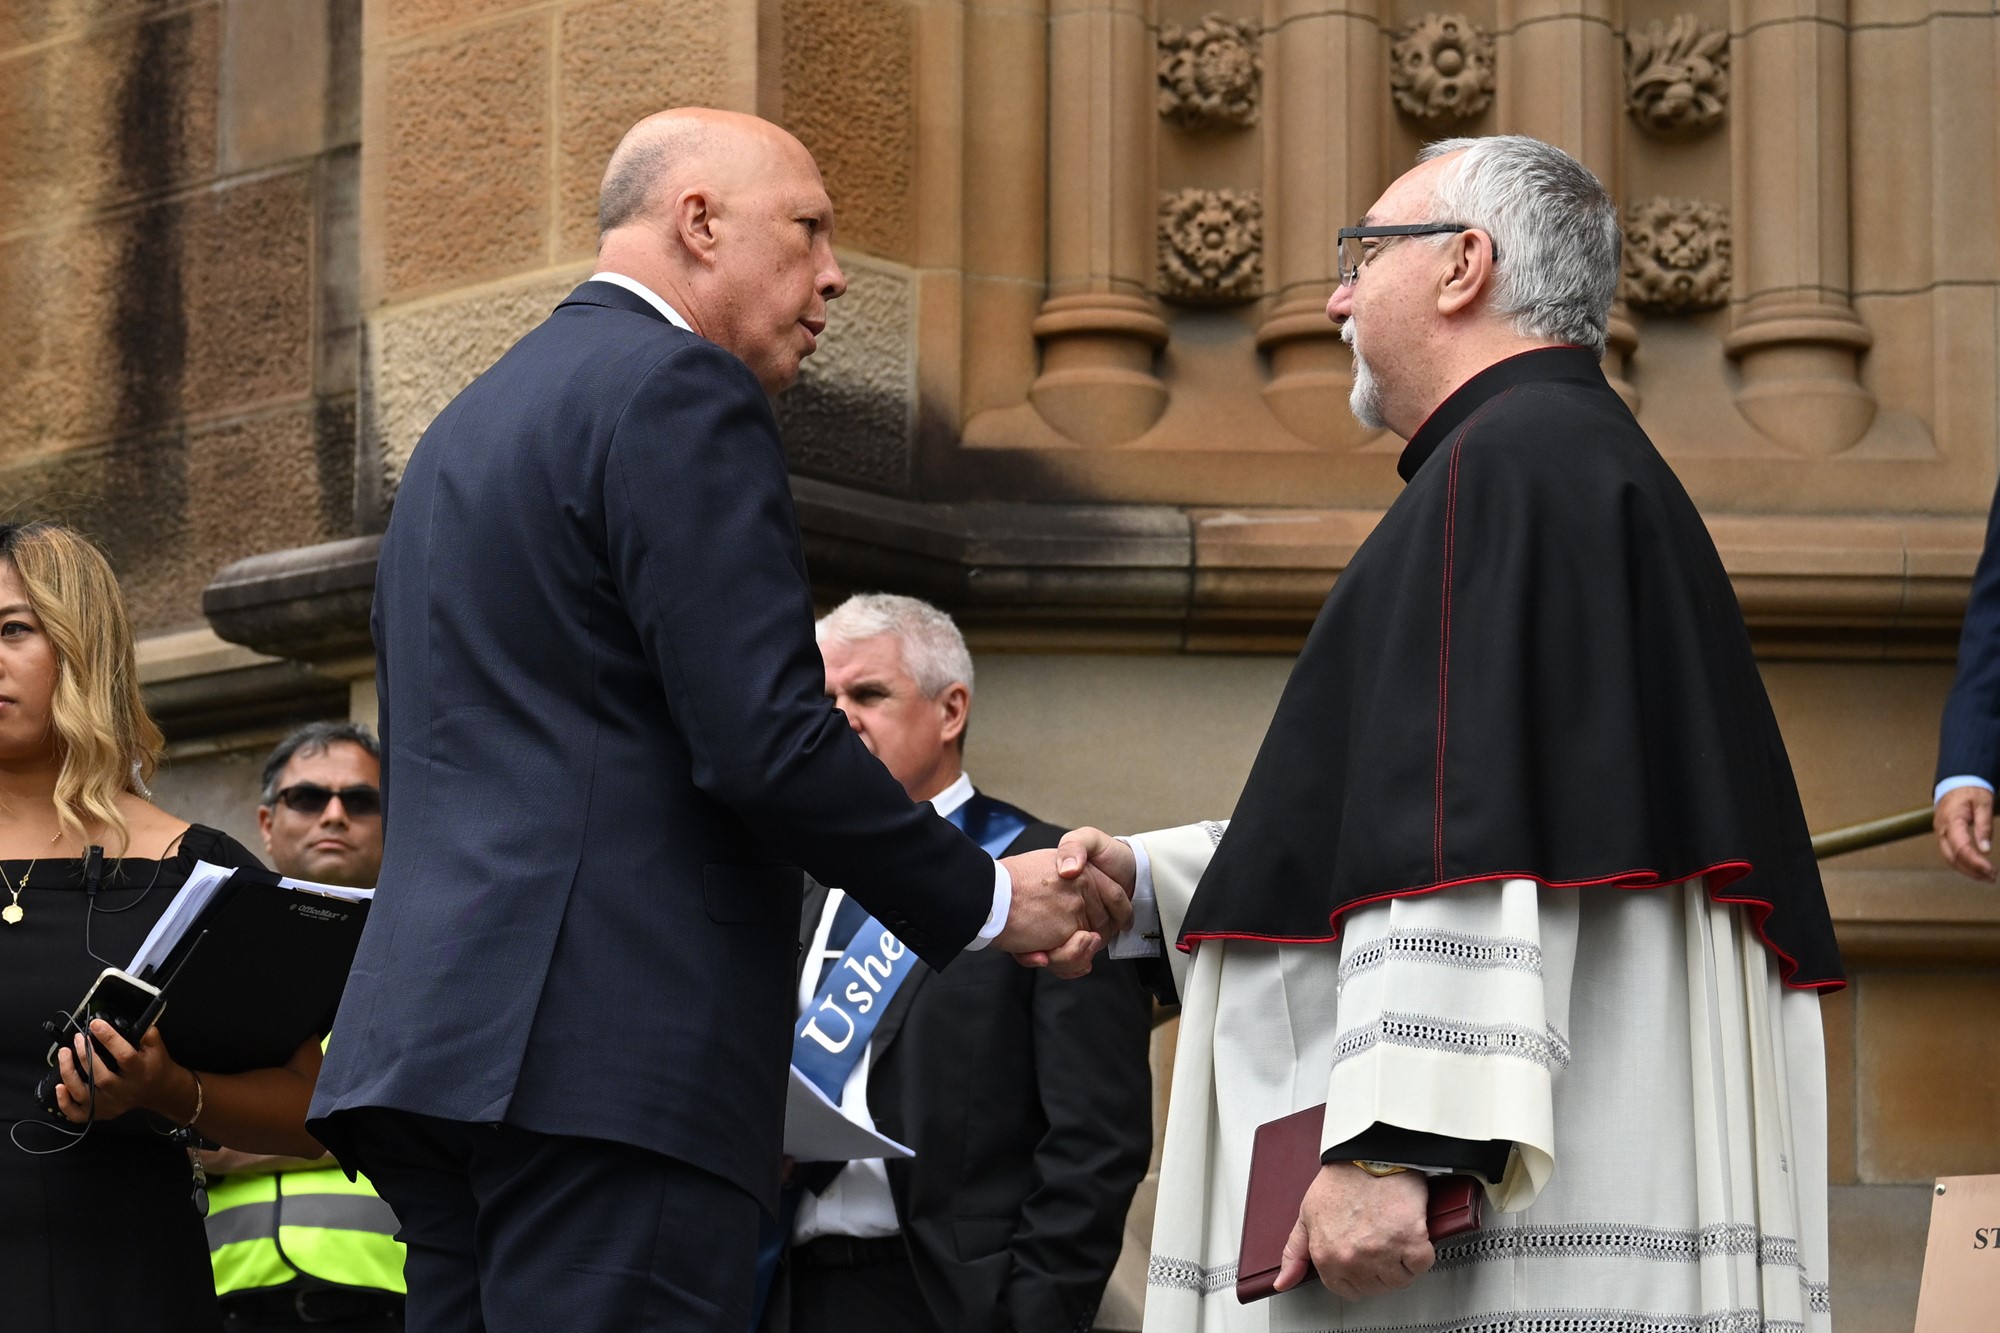 Peter Dutton shakes hands with a man dressed in religious clothing.